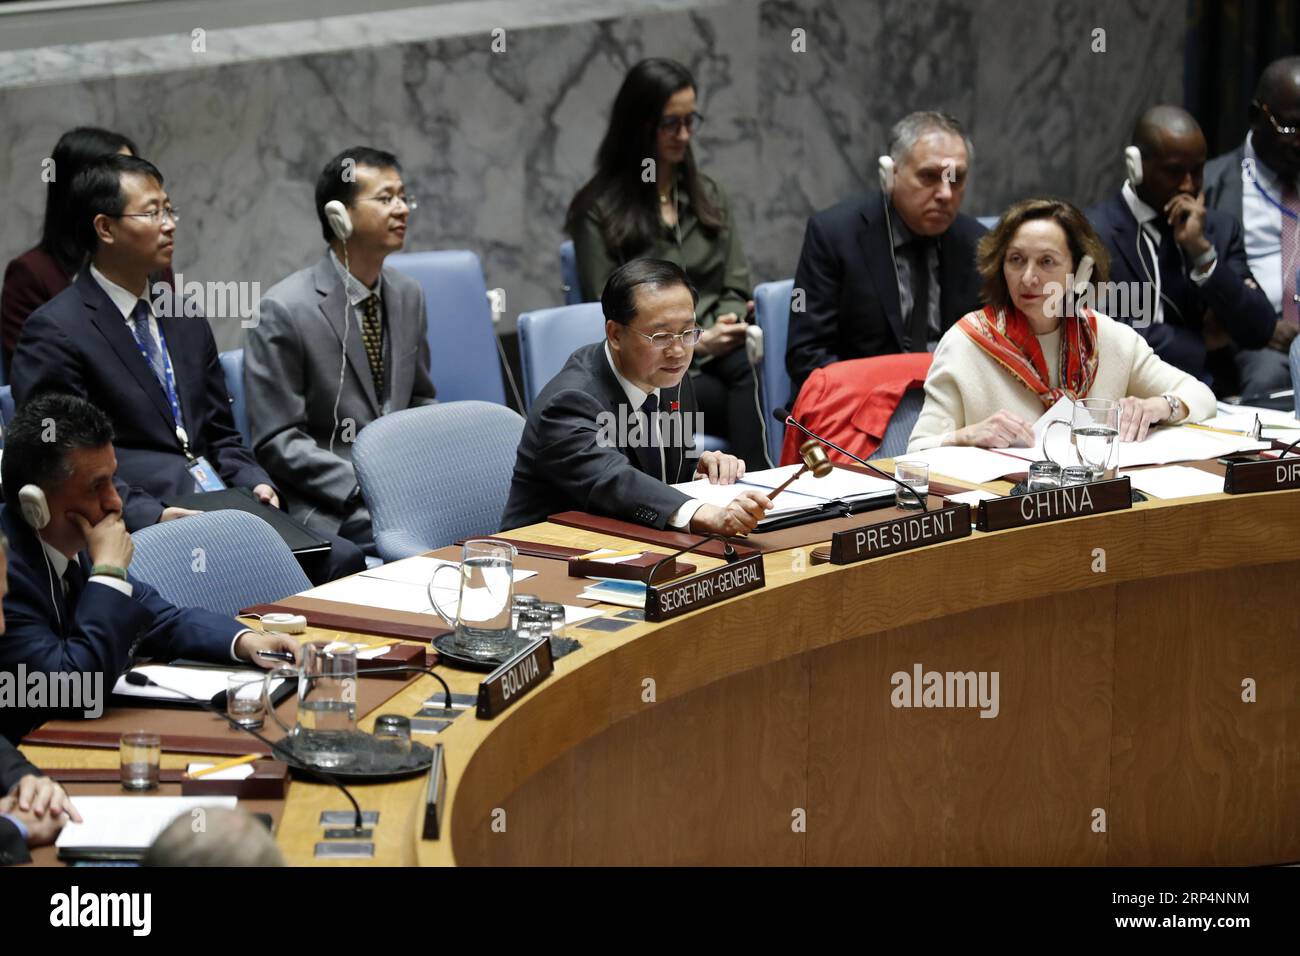 (181114) -- UNITED NATIONS, Nov. 14, 2018 -- Ma Zhaoxu (C, Front), Chinese Permanent Representative to the United Nations, chairs a Security Council meeting on Kosovo at the UN headquarters in New York, on Nov. 14, 2018. The top UN envoy in Kosovo on Wednesday called for social engagement for the success of negotiations on a possible new comprehensive agreement between Pristina and Belgrade. ) UN-SECURITY COUNCIL-MEETING-KOSOVO LixMuzi PUBLICATIONxNOTxINxCHN Stock Photo